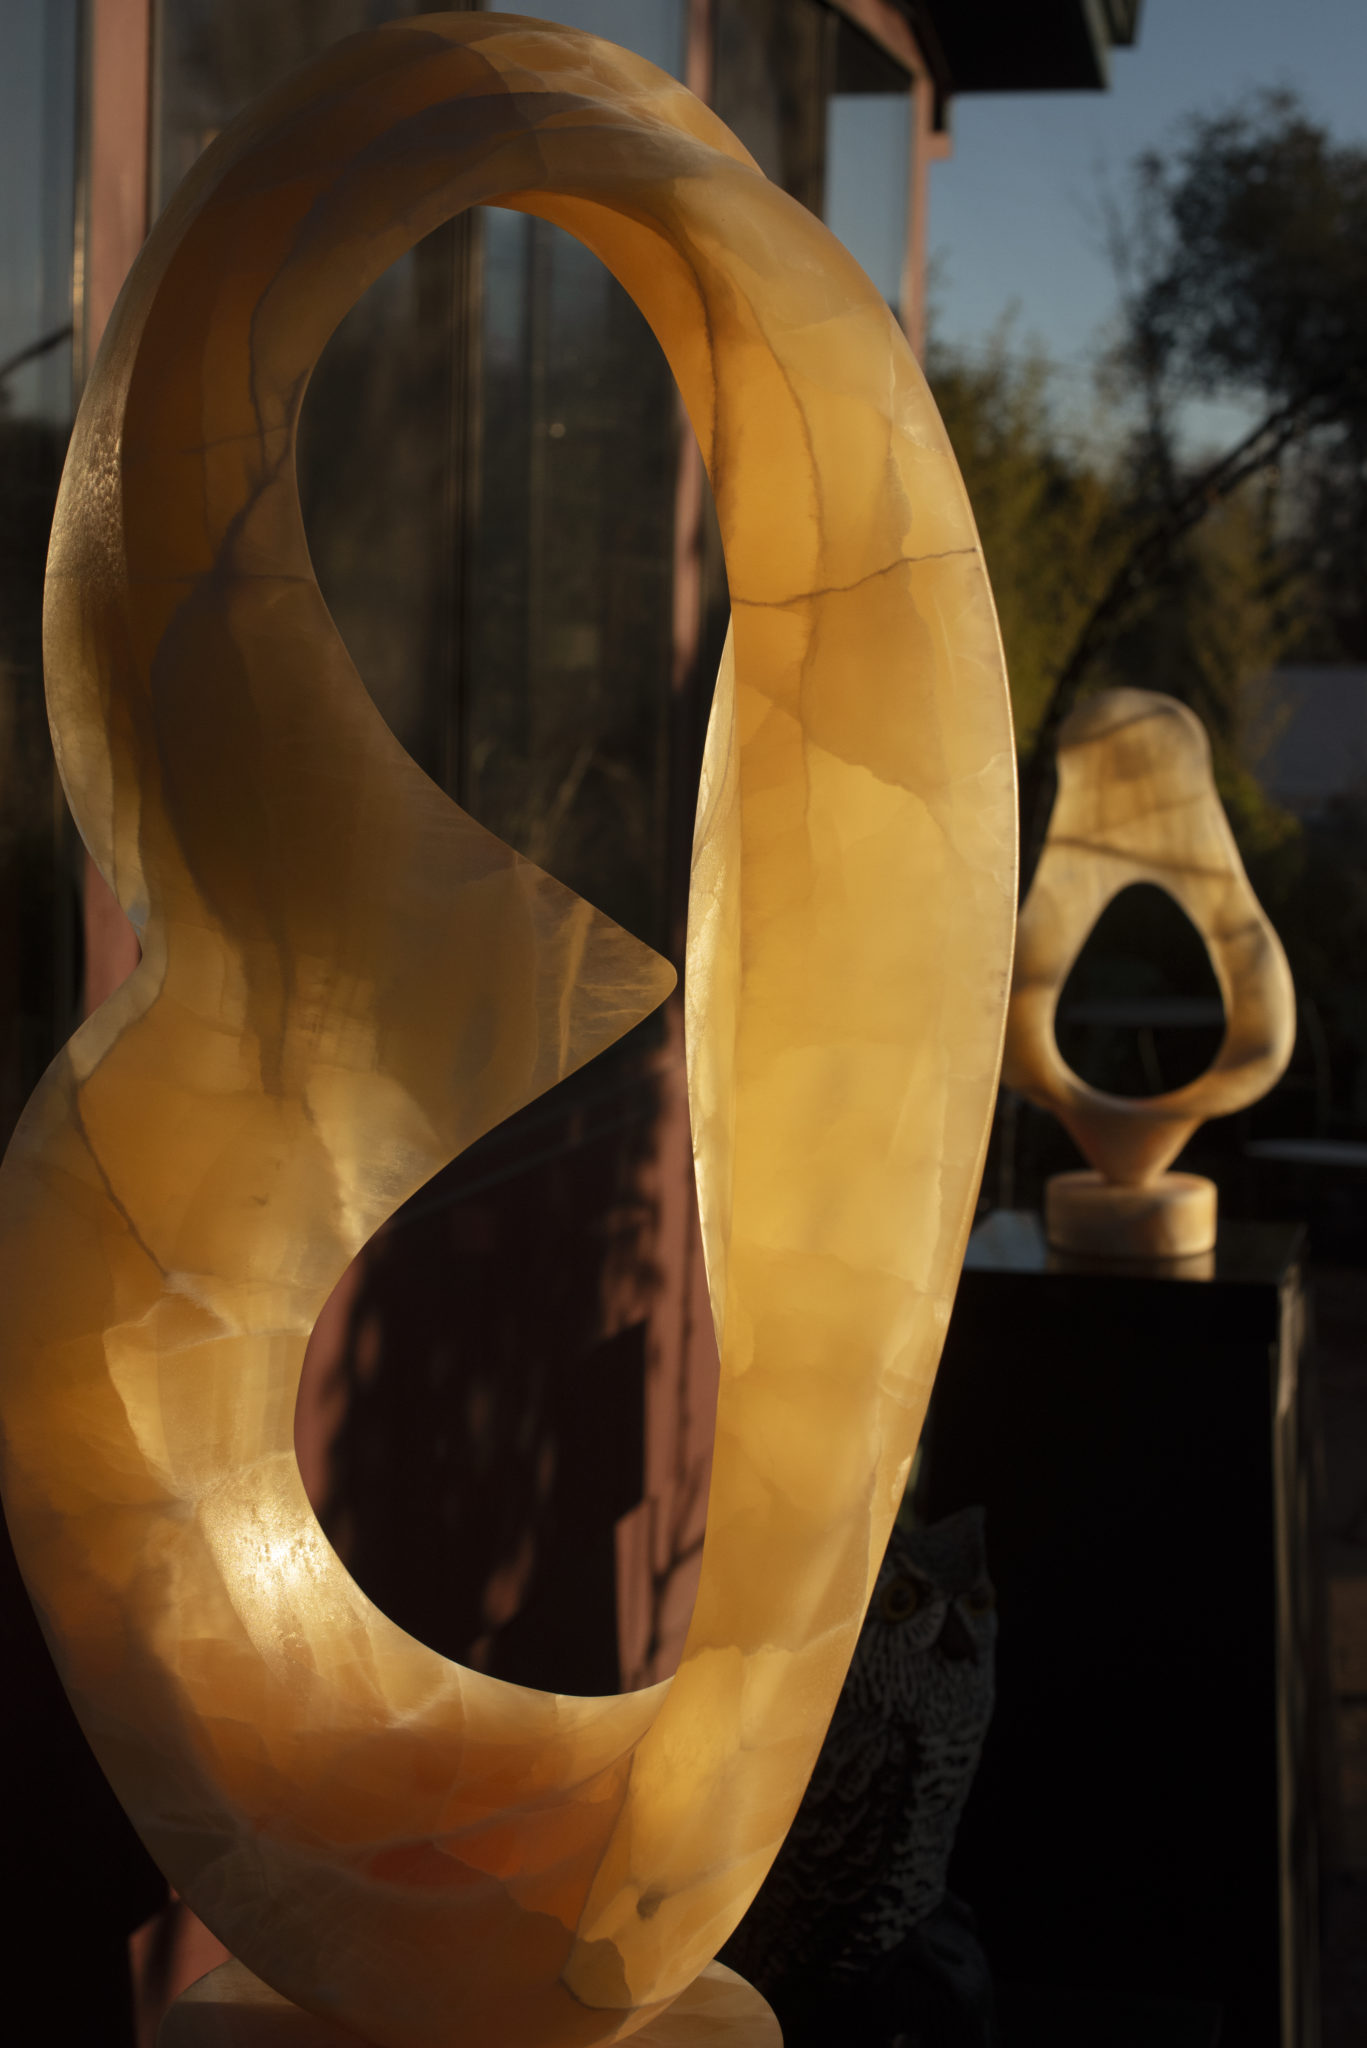 A piece titled ERIT made of Utah calcite by stone sculptor T Barny at sculpture garden in Healdsburg, California on January 14, 2021. (Photo: Erik Castro/for Sonoma Magazine)